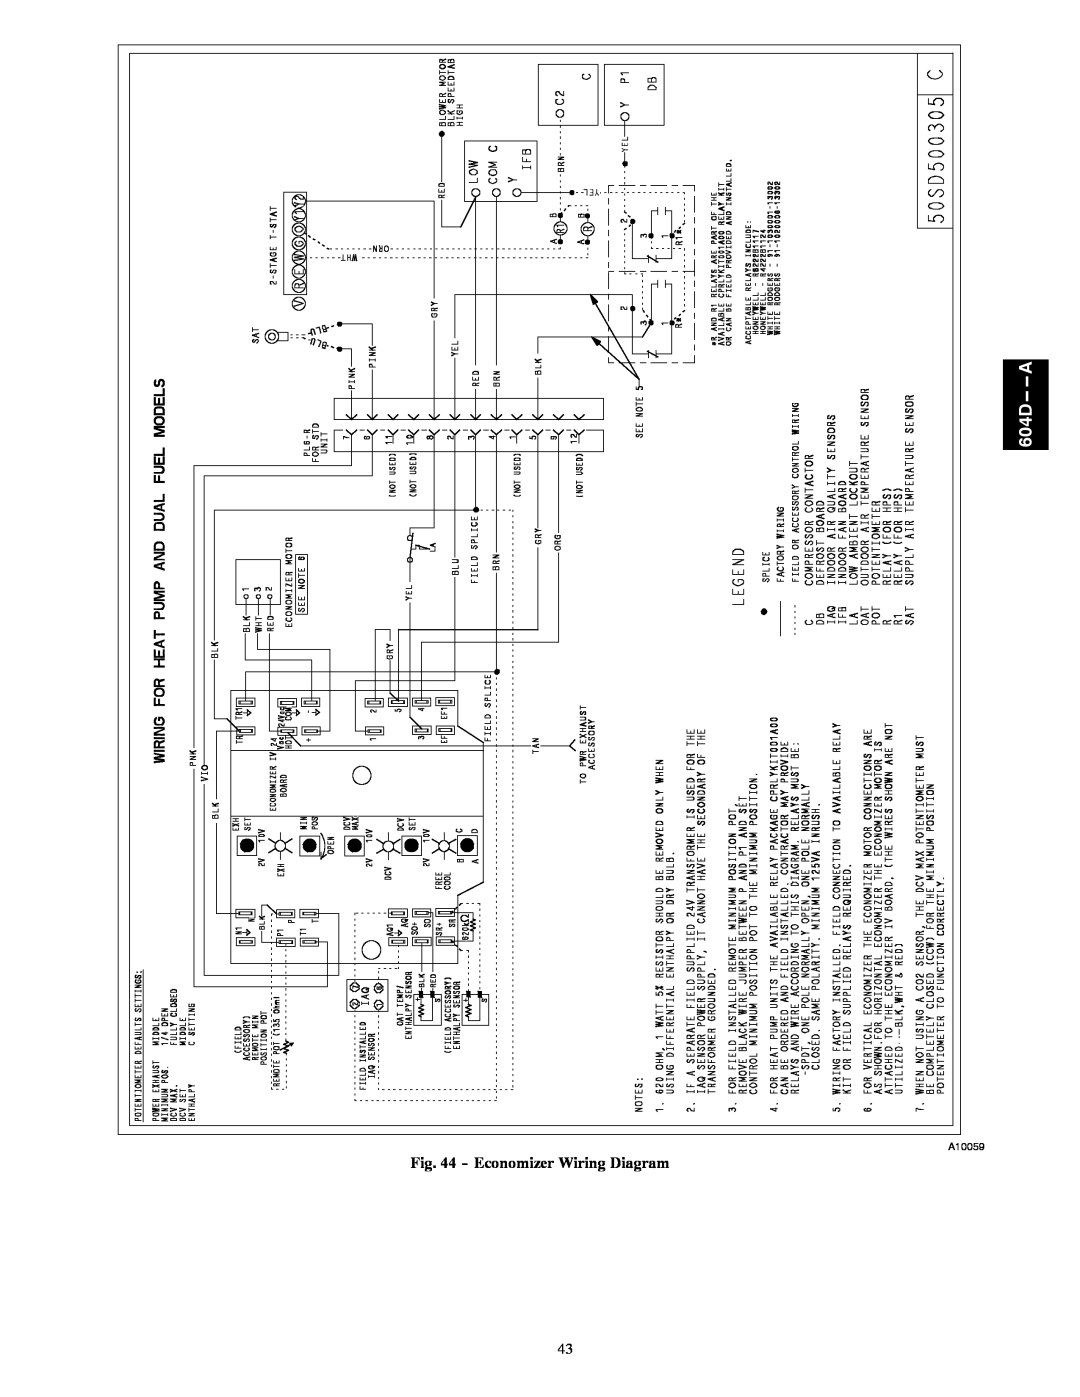 Bryant 604D--A installation instructions Economizer Wiring Diagram, 604D-- --A, A10059 